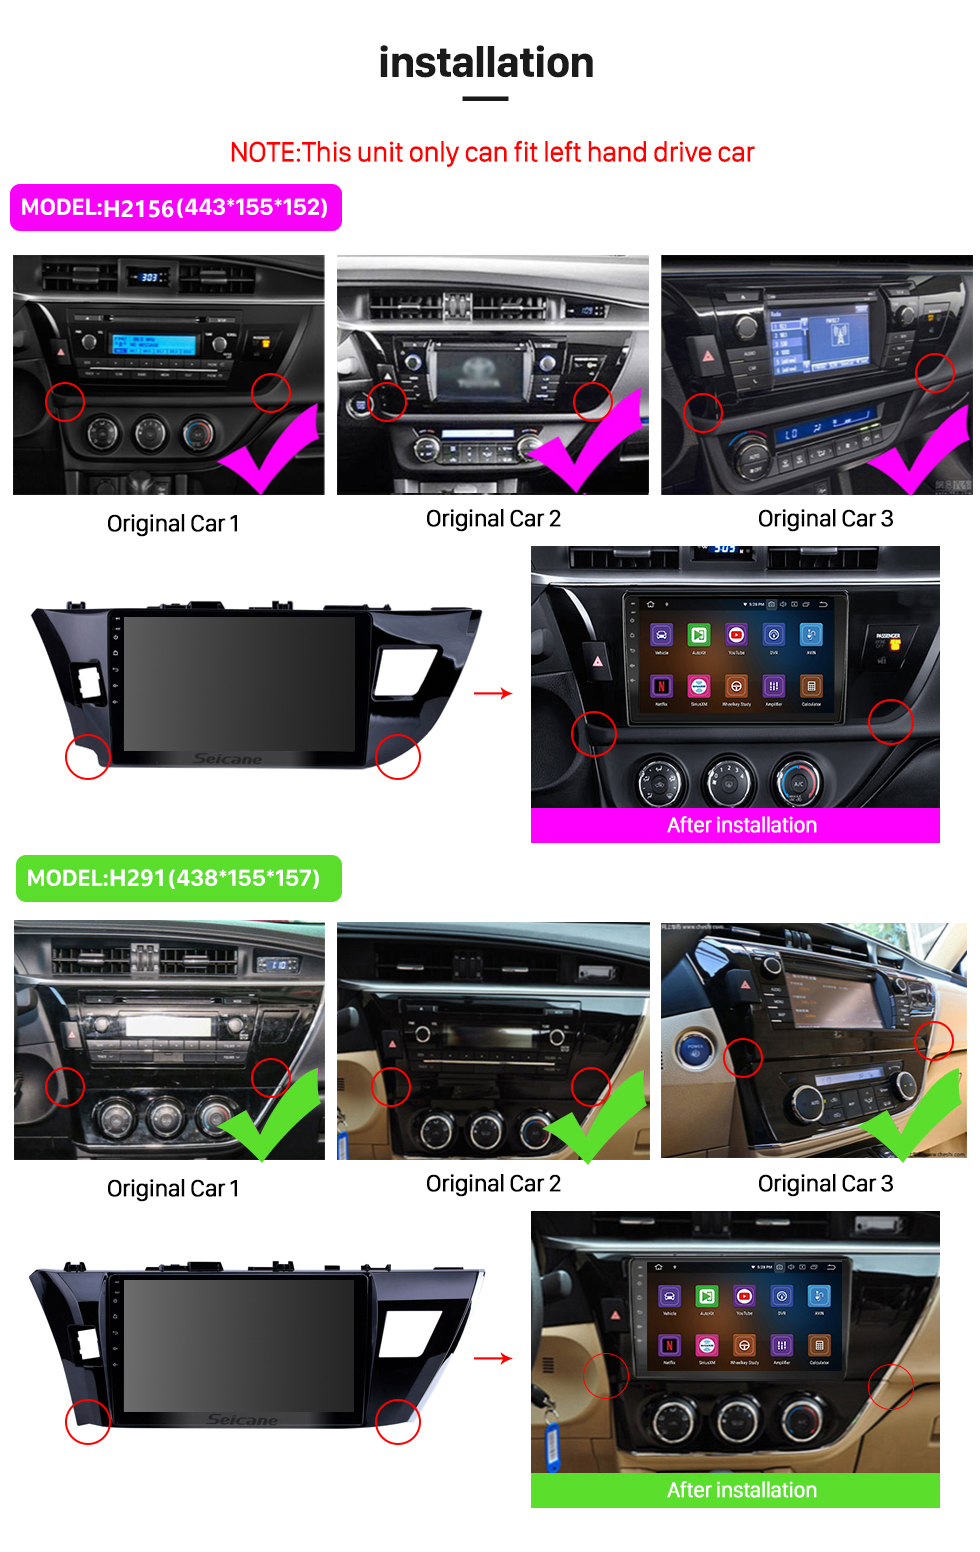 Seicane 10.1 inch 2013 2014 2015 Toyota Corolla LHD Android 12.0 GPS Navigation System with 1024*600 touchscreen Bluetooth Radio OBD2 DVR Rearview camera TV 1080P 4G WIFI Steering Wheel Control Mirror link